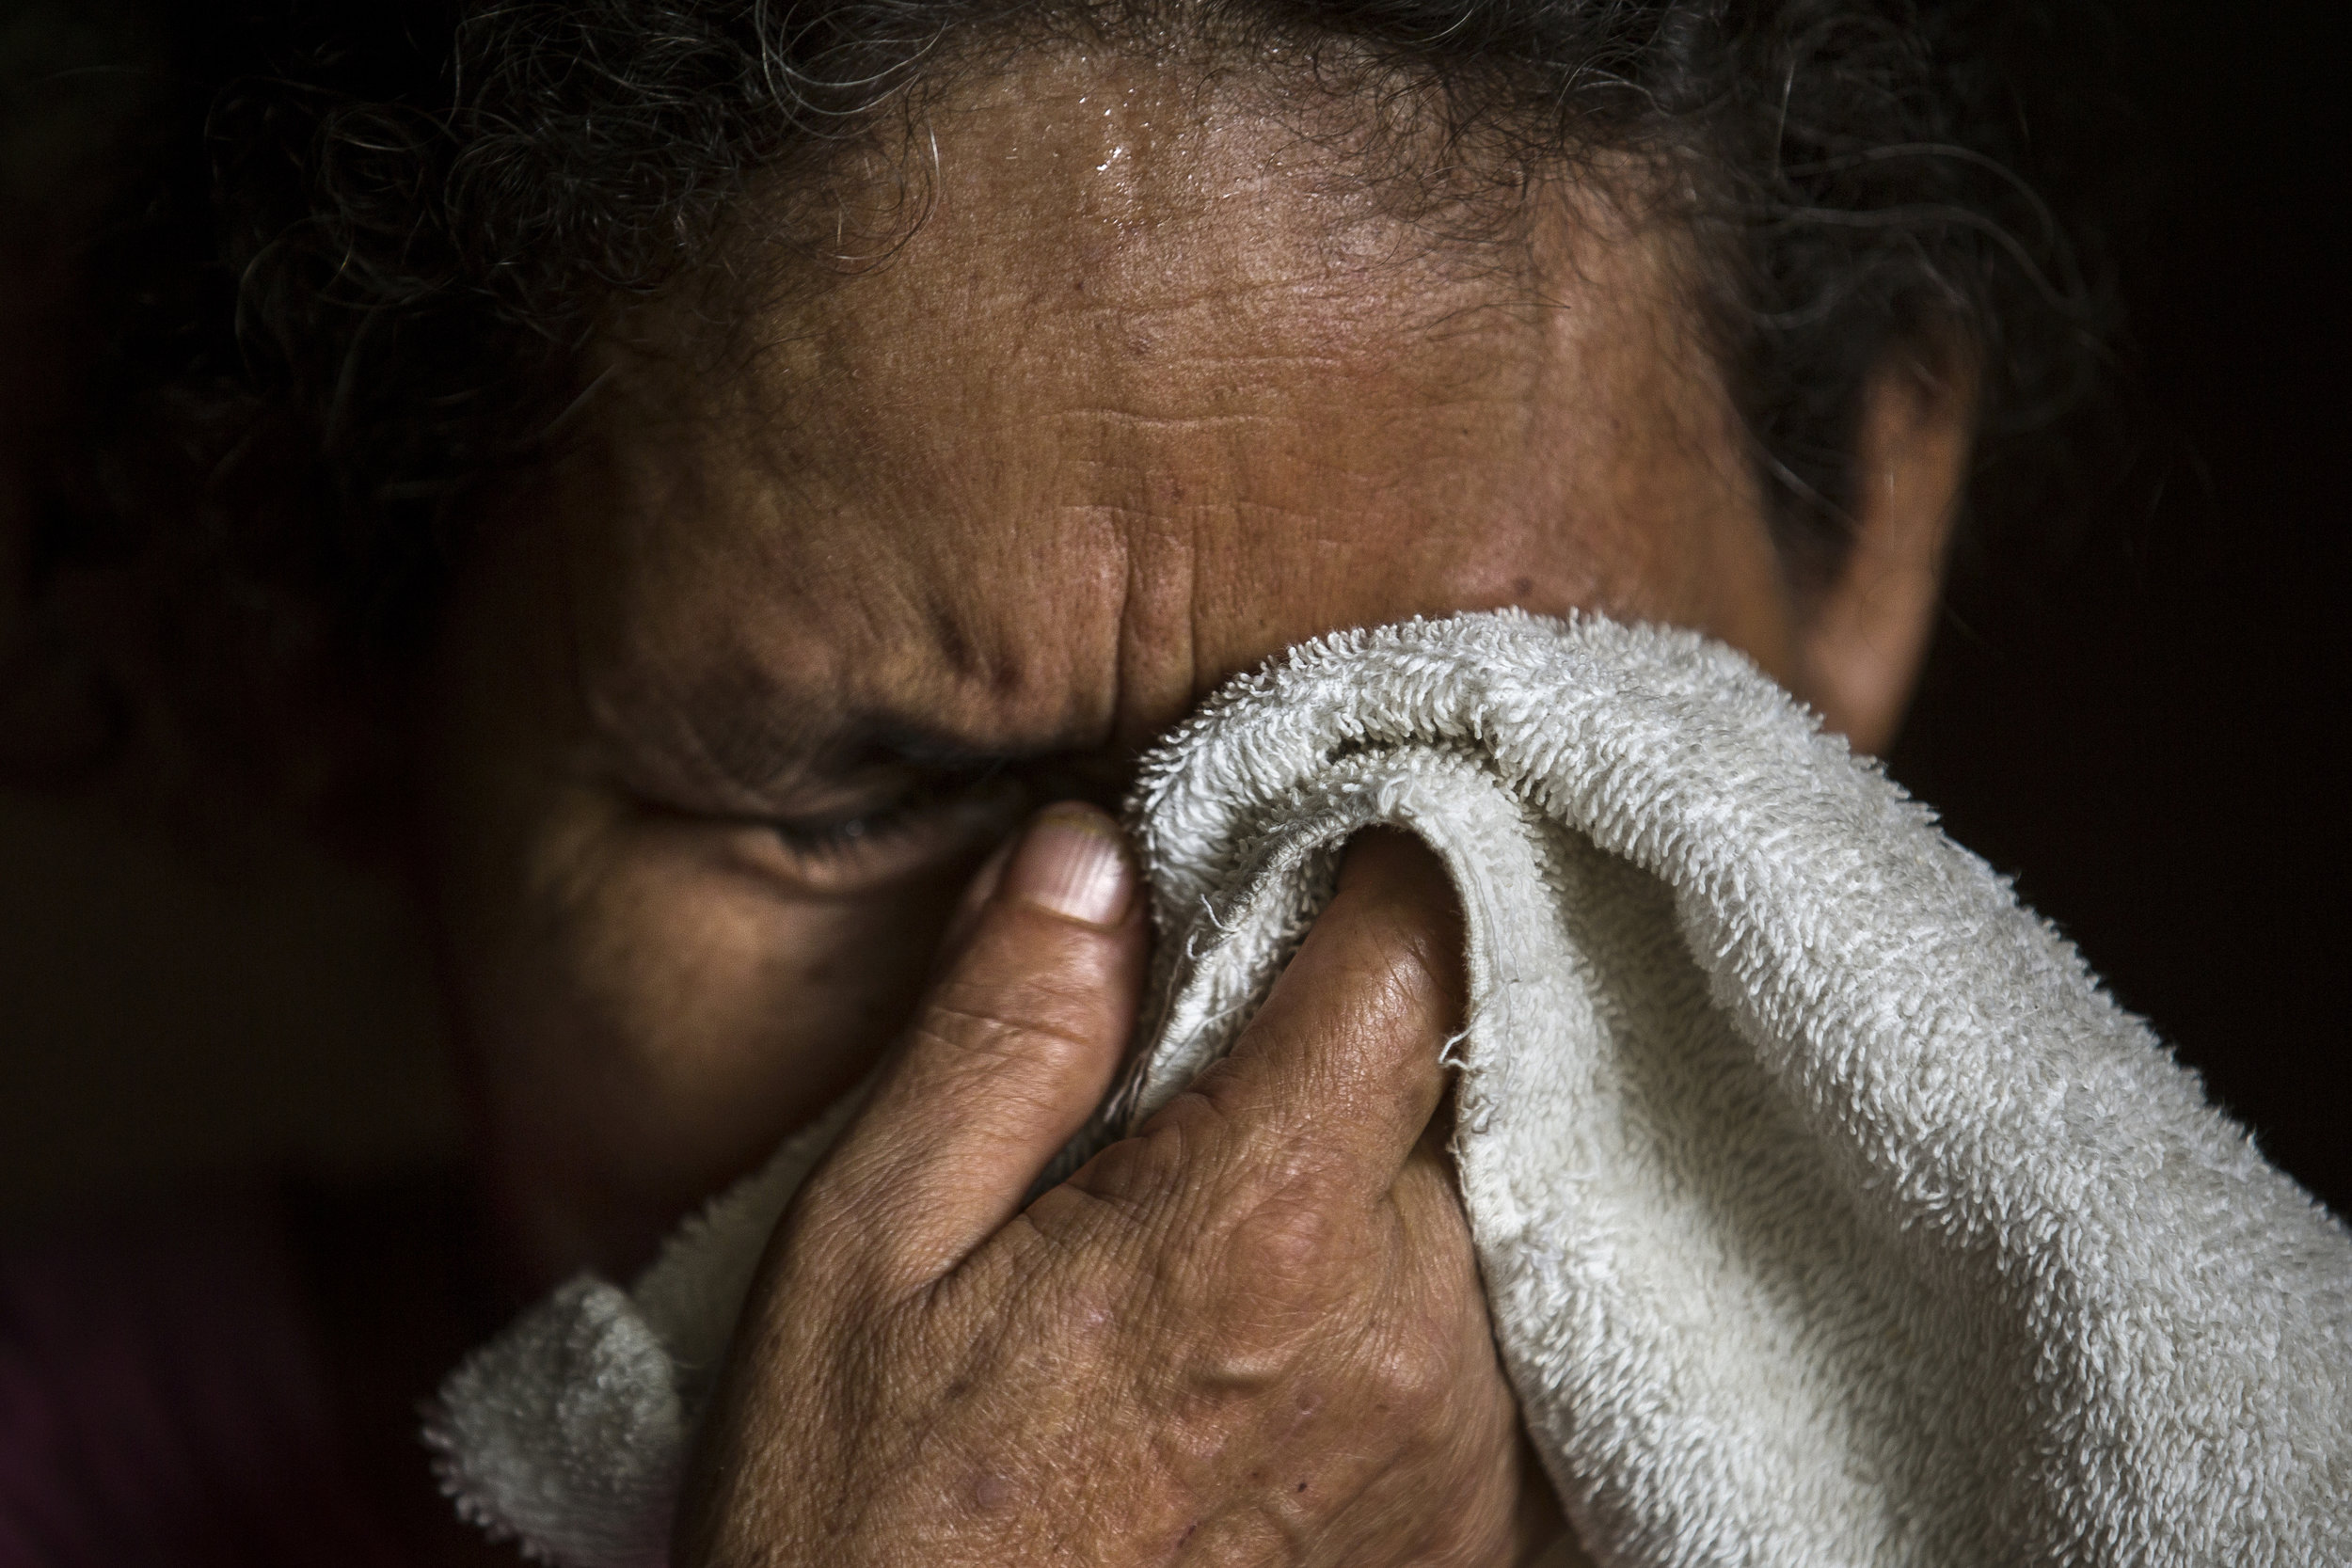  SAN HILARIO, EL SALVADOR. Maria Leoneor Arevalo Romero cries while thinking of her two sons Ernesto de Jesus Arvelao Medina, recently killed by gang members in their hometown of in San Hilario in El Salvador, and Jose Adrian Zamora Arevalo who was d